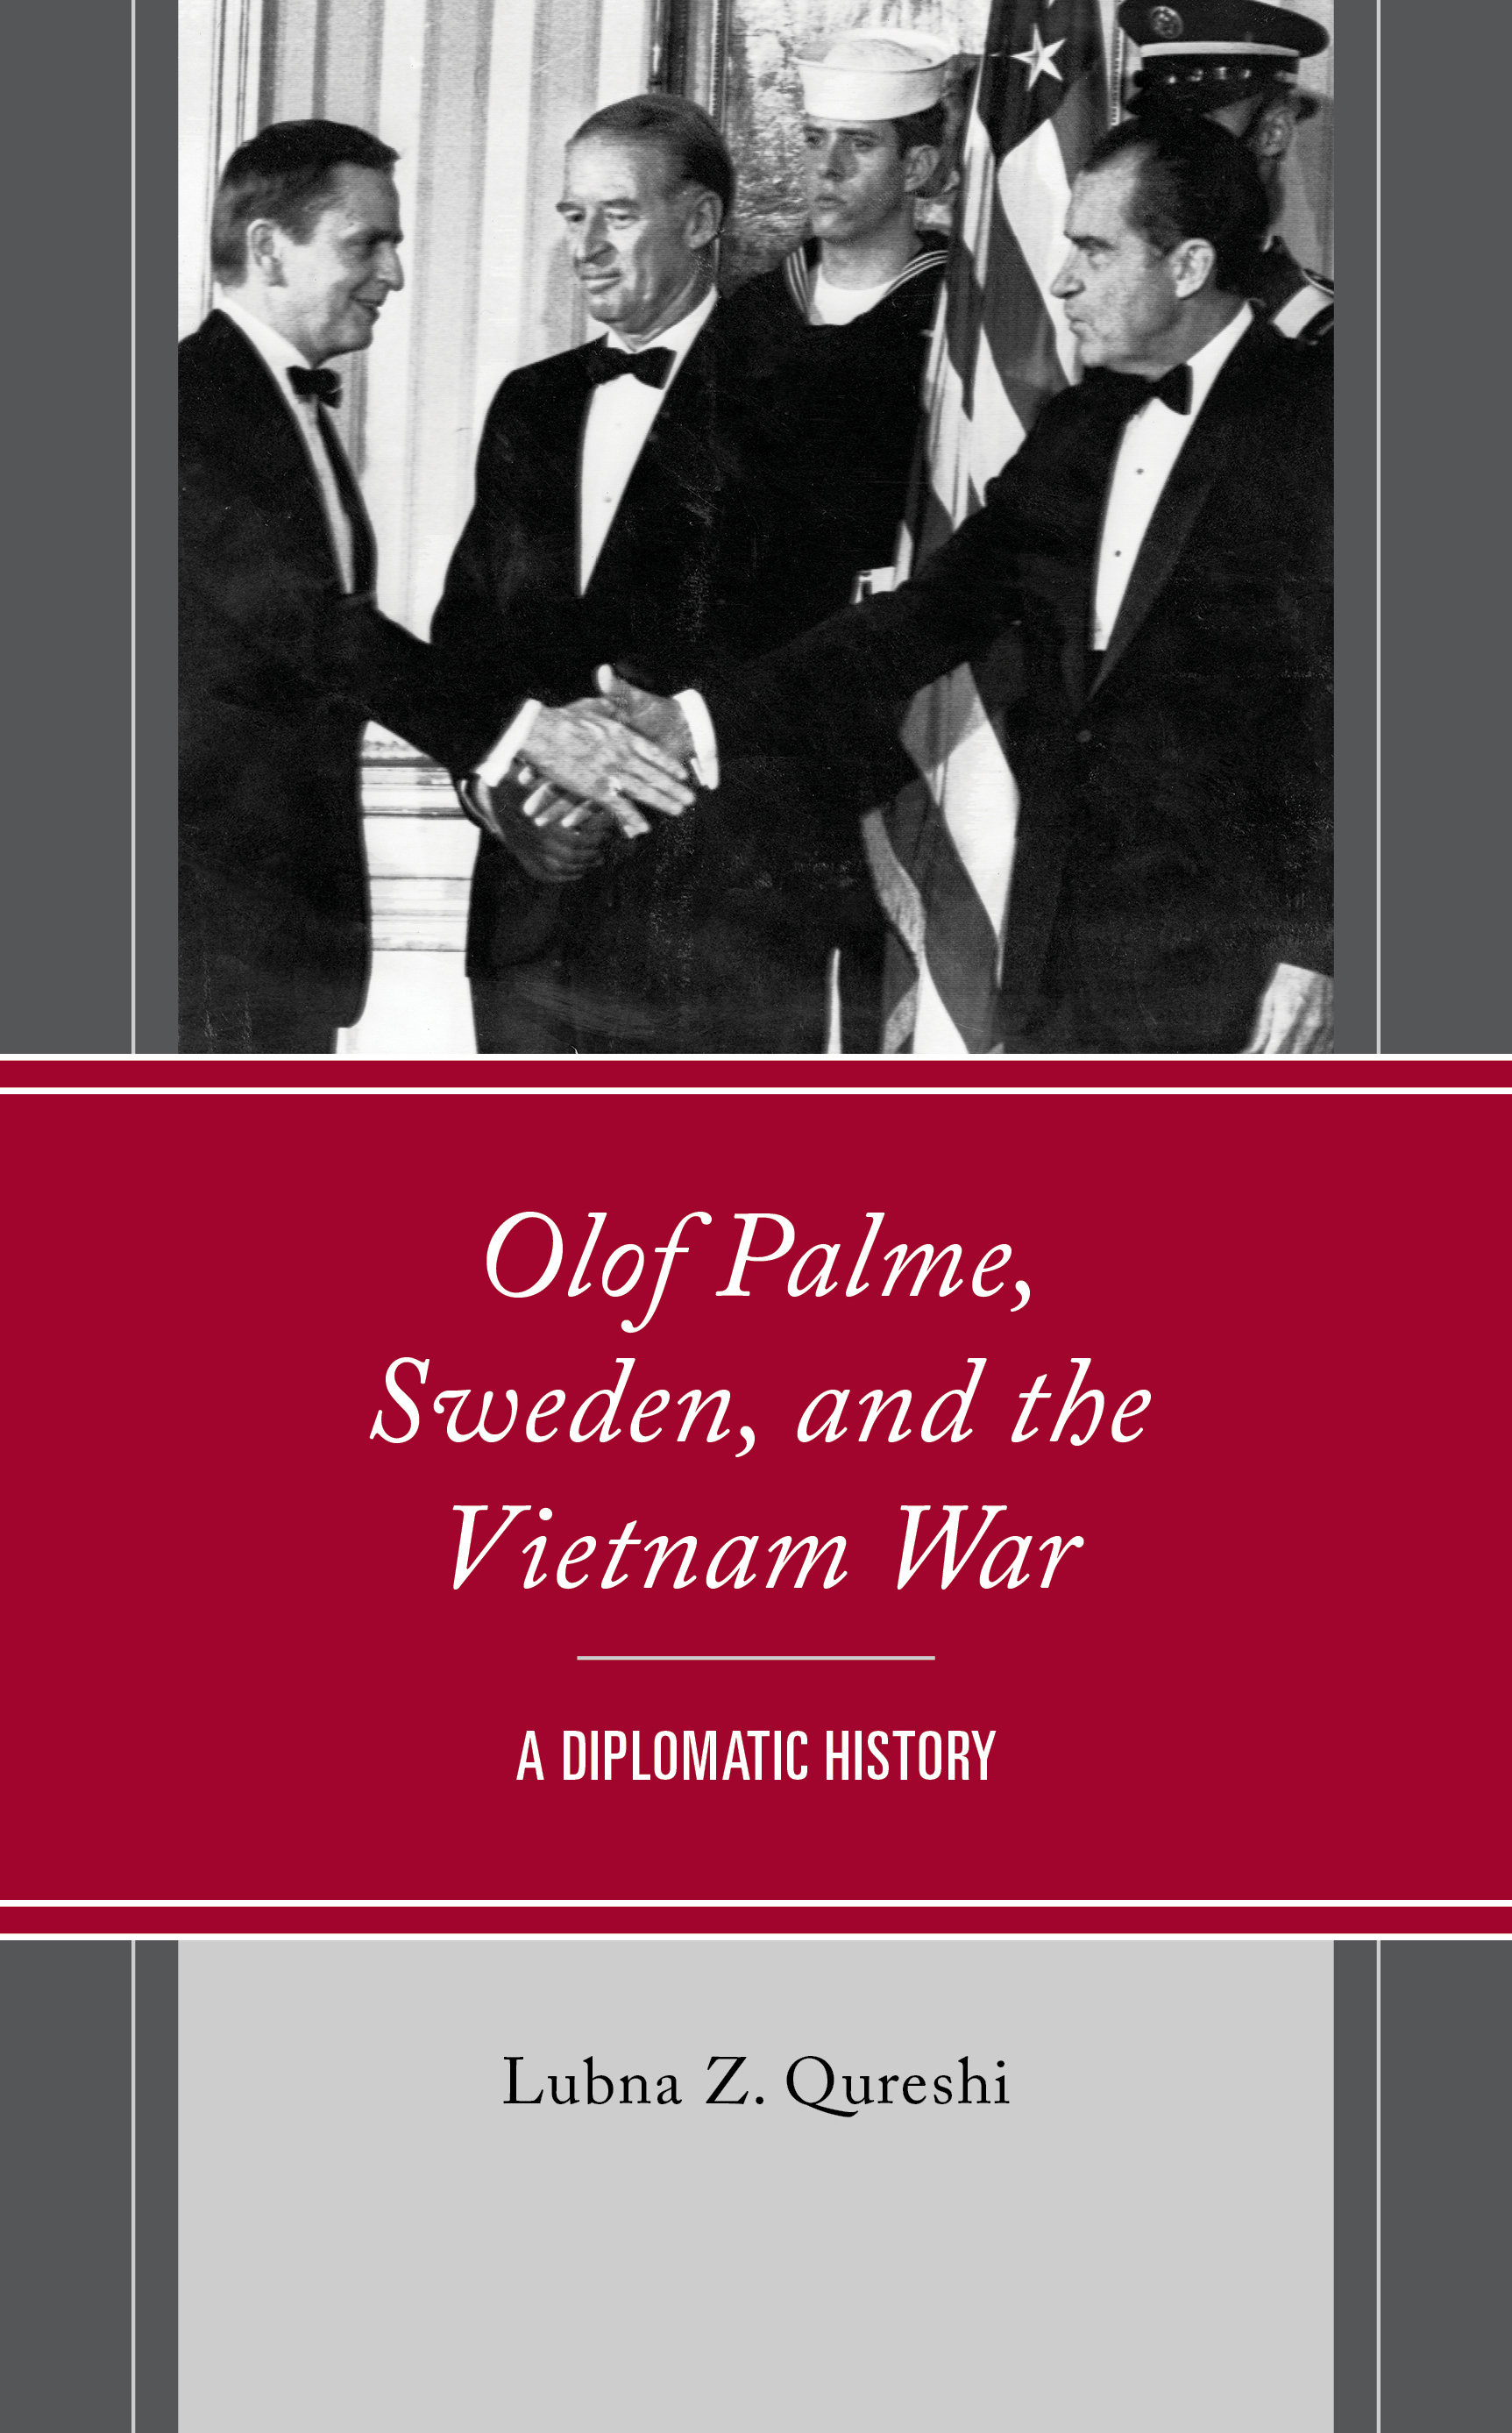 Olof Palme, Sweden, and the Vietnam War: A Diplomatic History